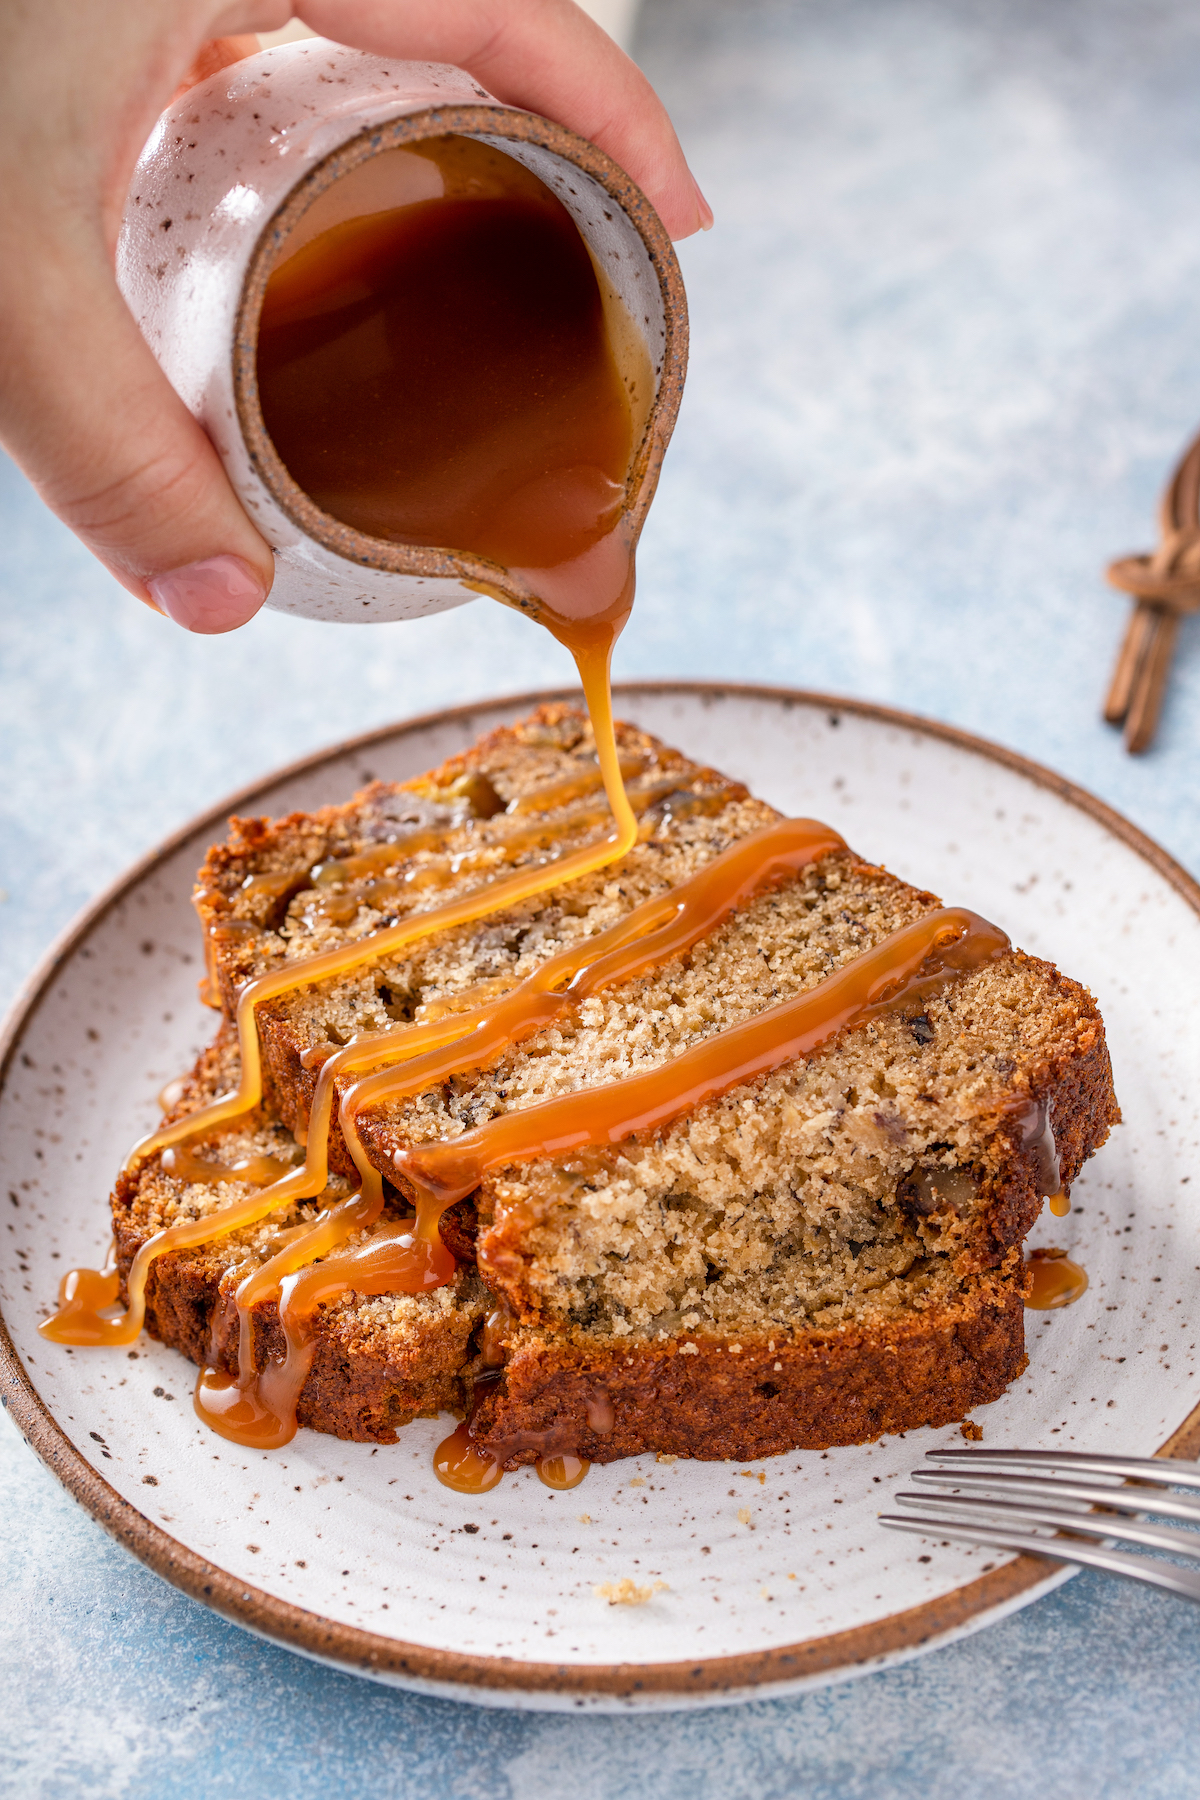 Caramel sauce being drizzled over slices of sweet quick bread.